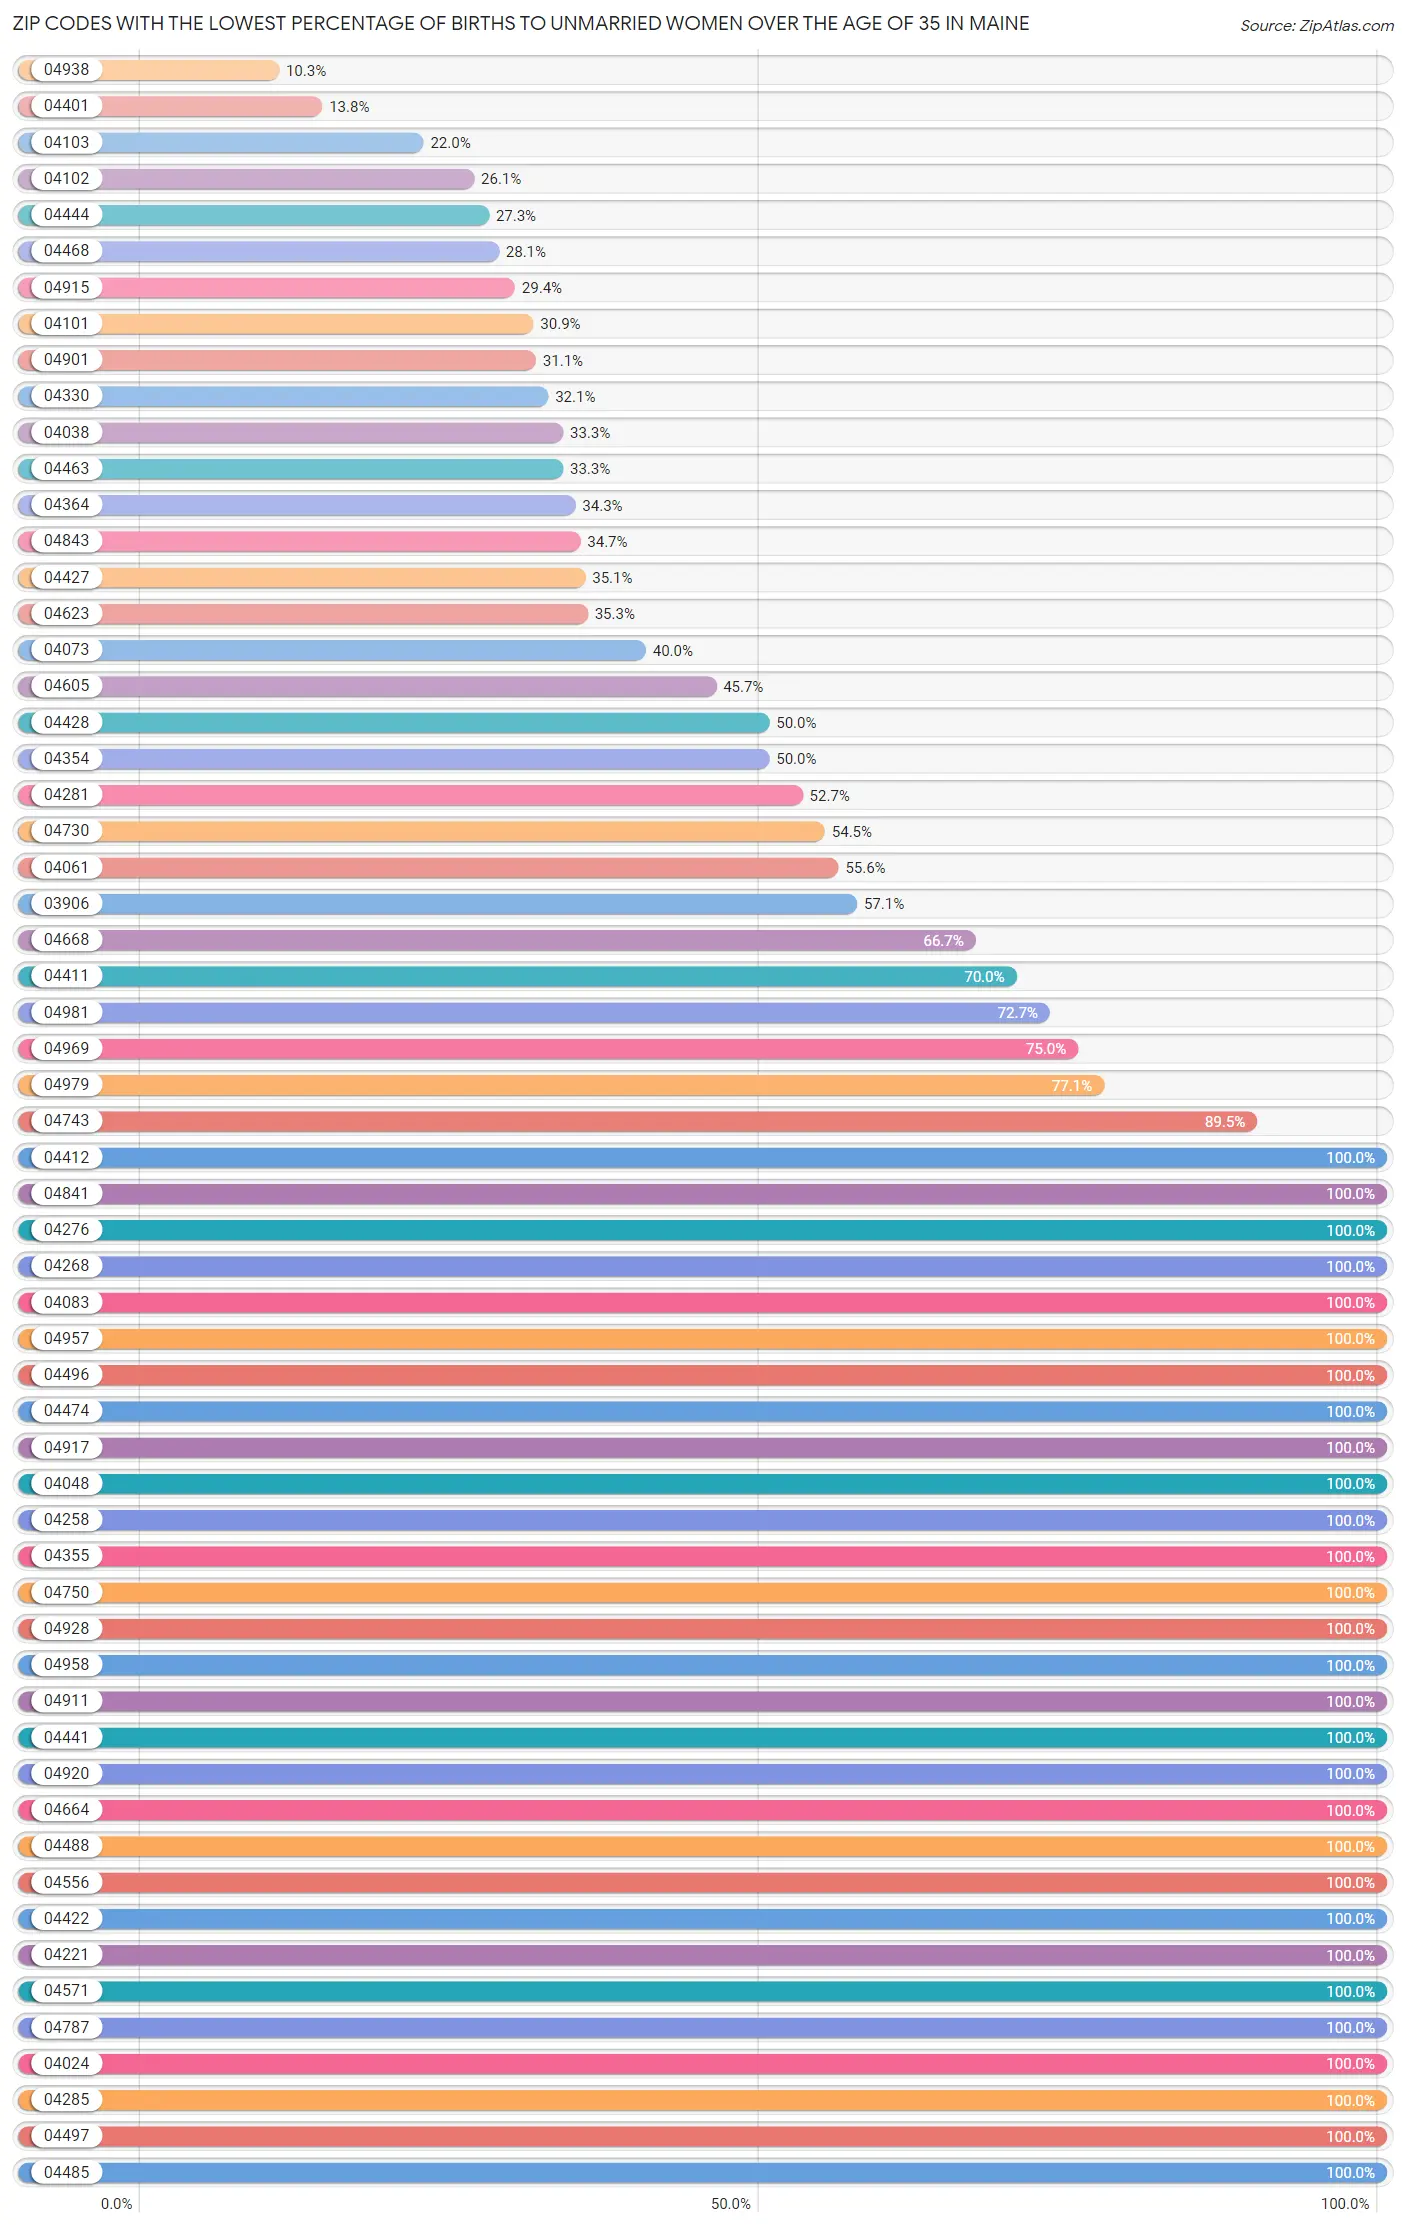 Zip Codes with the Lowest Percentage of Births to Unmarried Women over the Age of 35 in Maine Chart